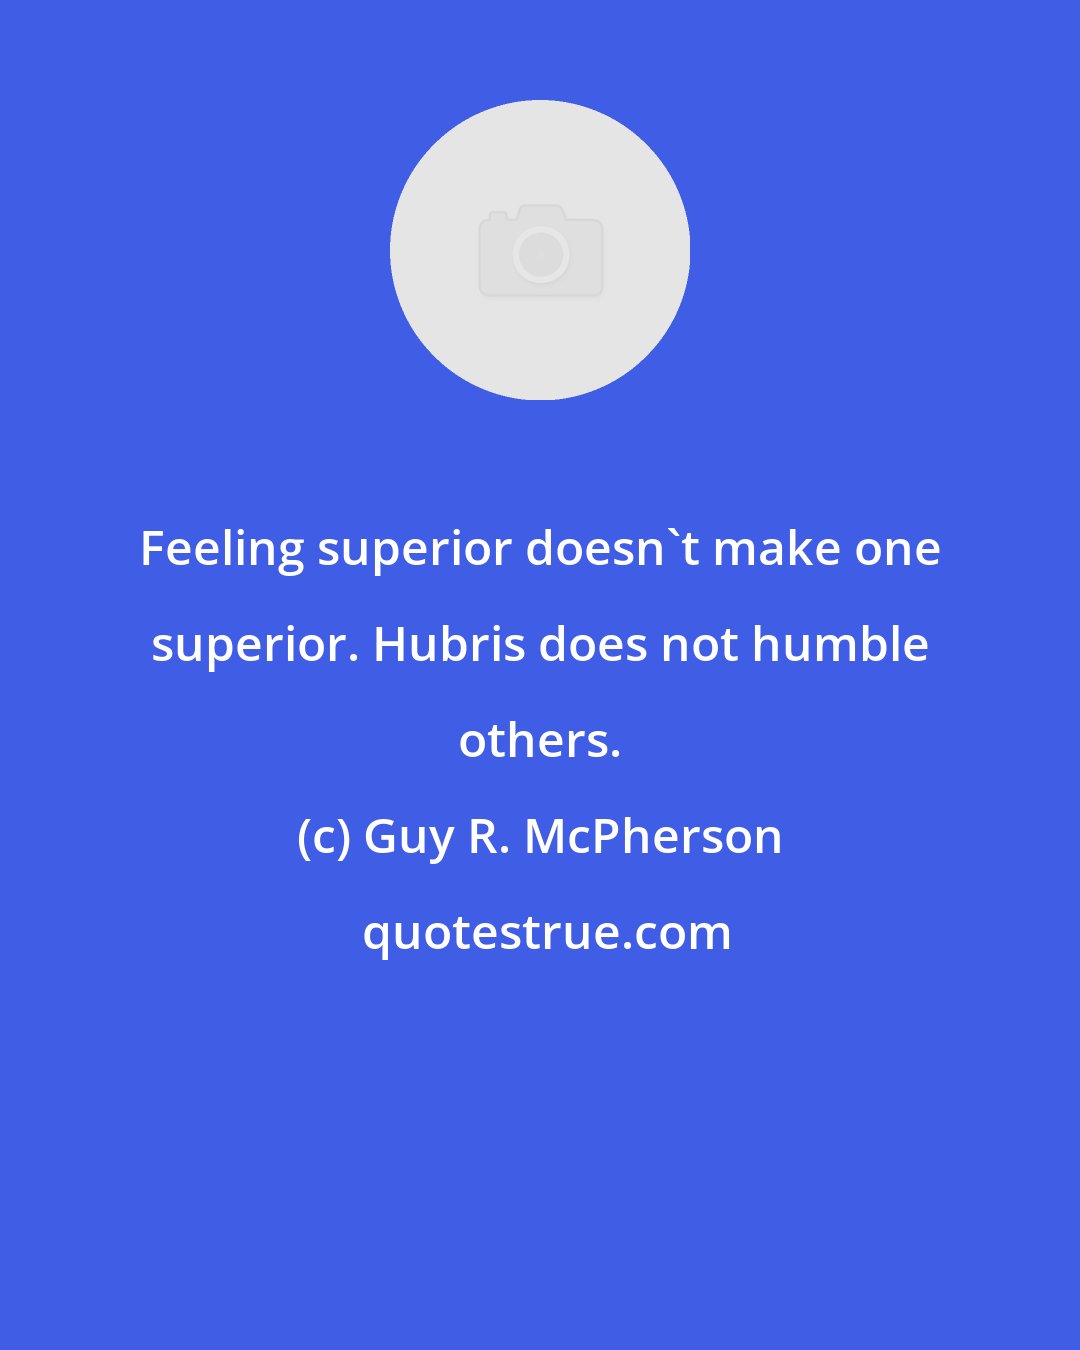 Guy R. McPherson: Feeling superior doesn't make one superior. Hubris does not humble others.